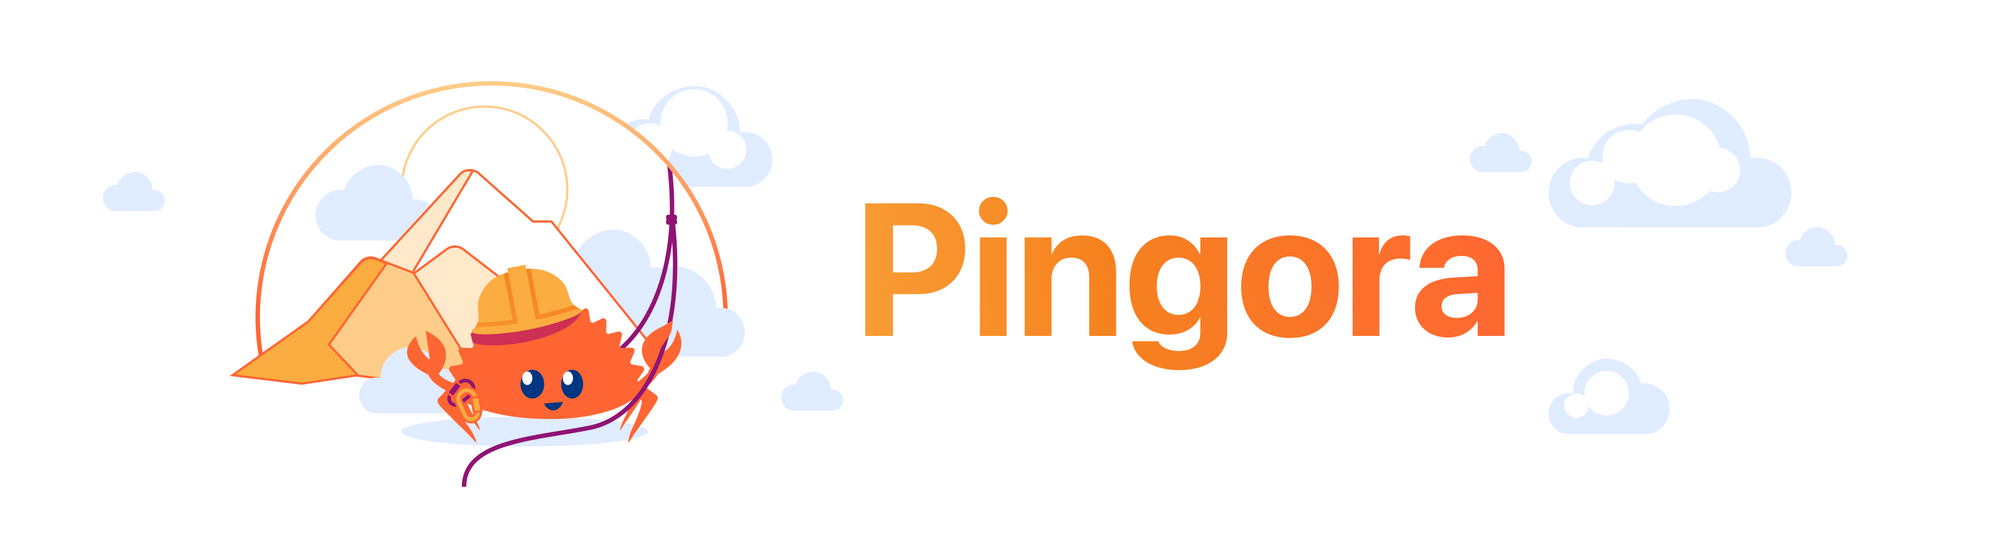 Cloudflare open sources Pingora, its high-performance Rust-based proxy framework